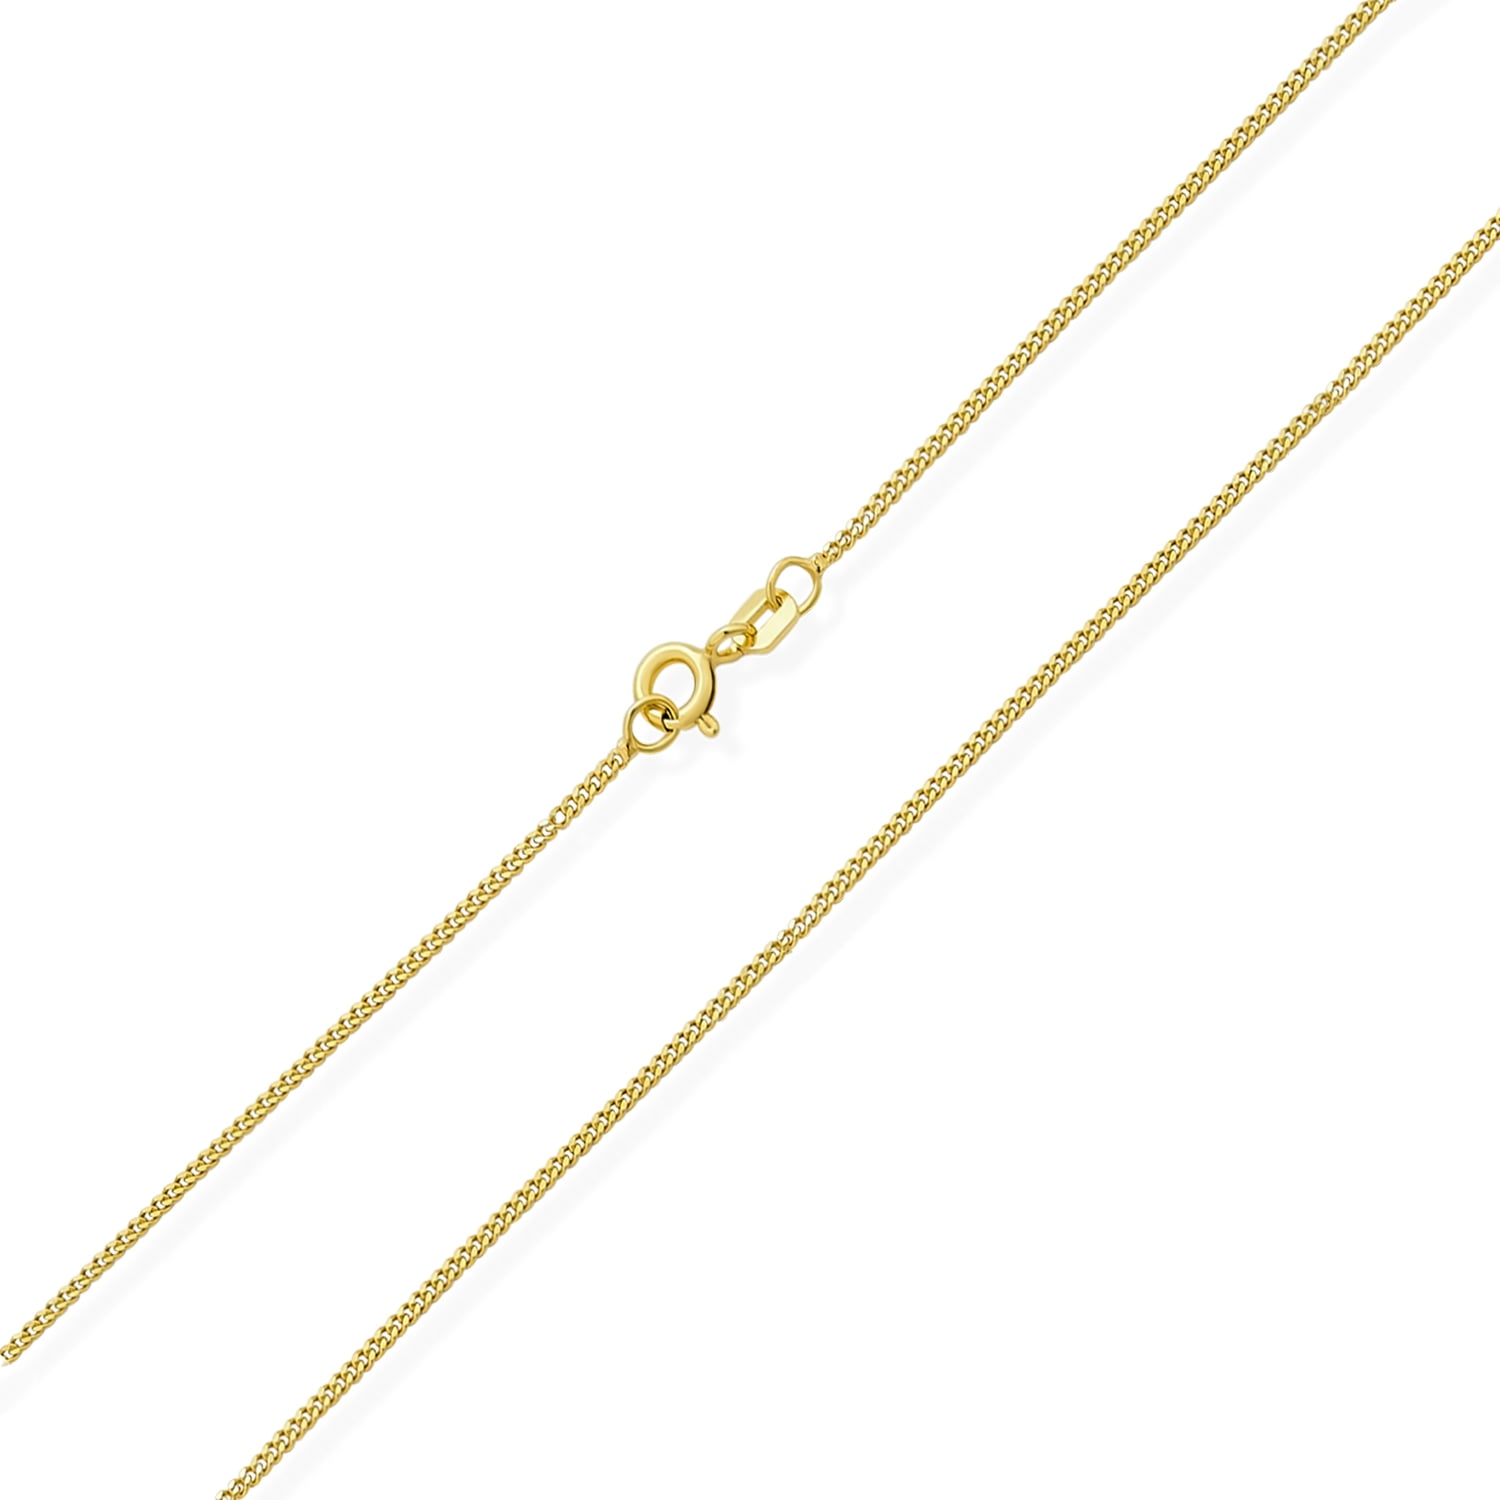 Stainless Steel Heavy Curb Chain. 14kt Gold Filled 5-Way Pendant with 24 Gold Plated 